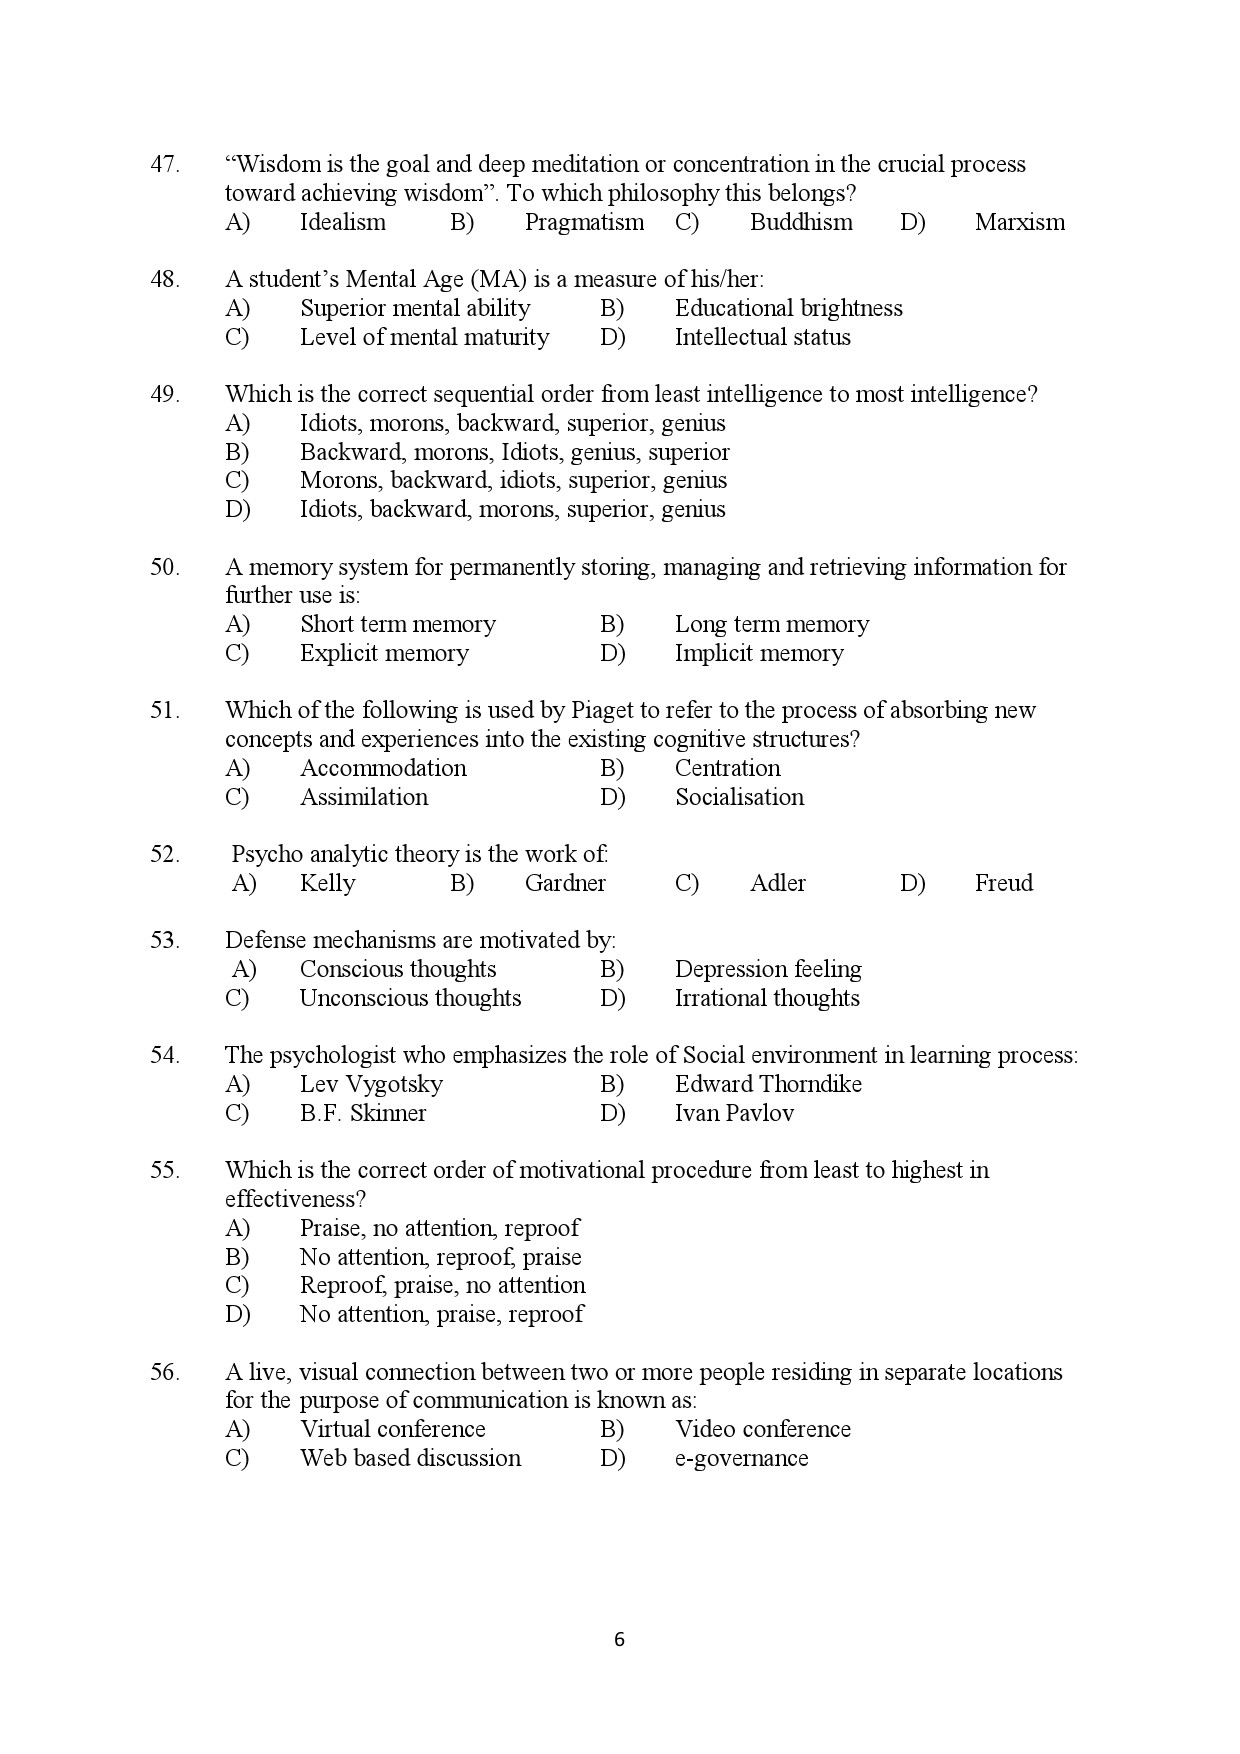 Kerala SET General Knowledge Exam Question Paper July 2018 6